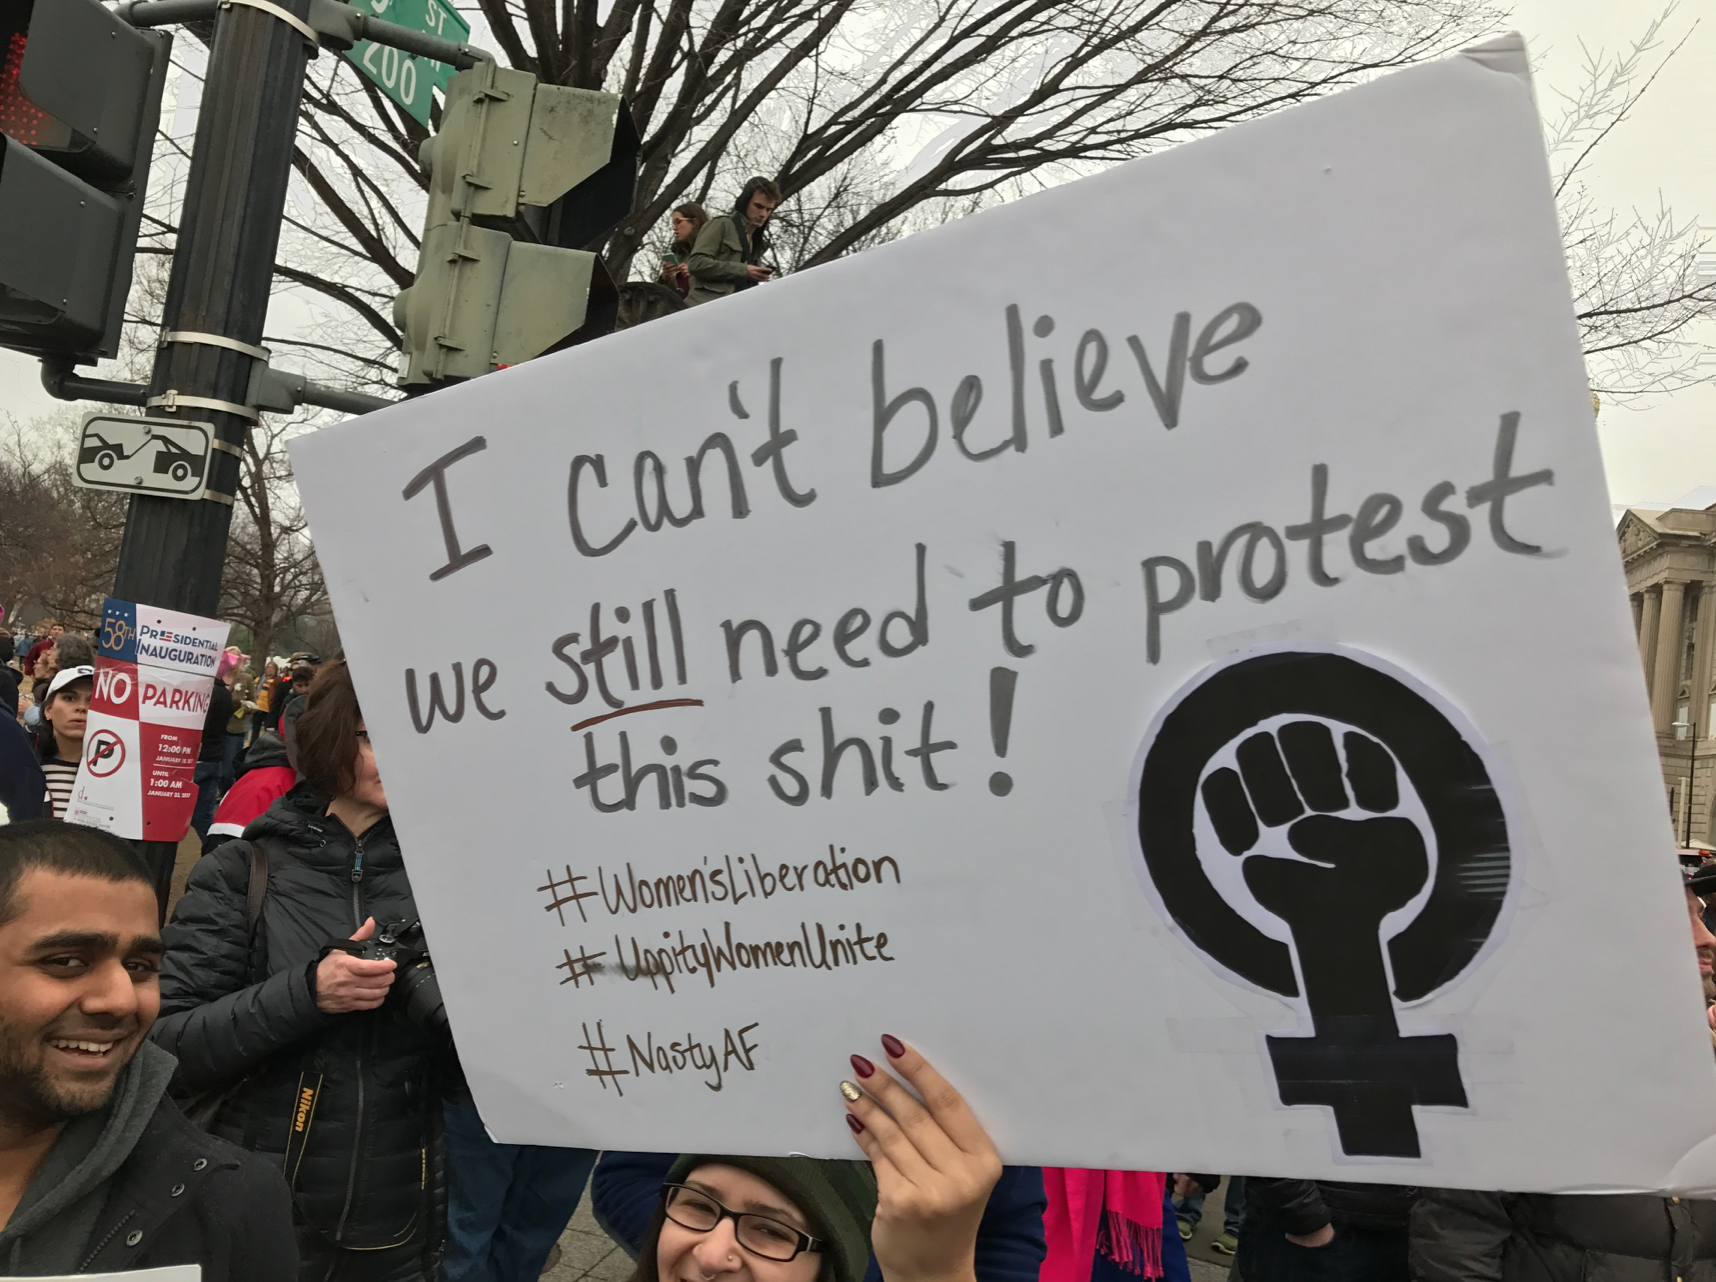 Sign reading: “I can’t believe we still need to protest this sh*t!”